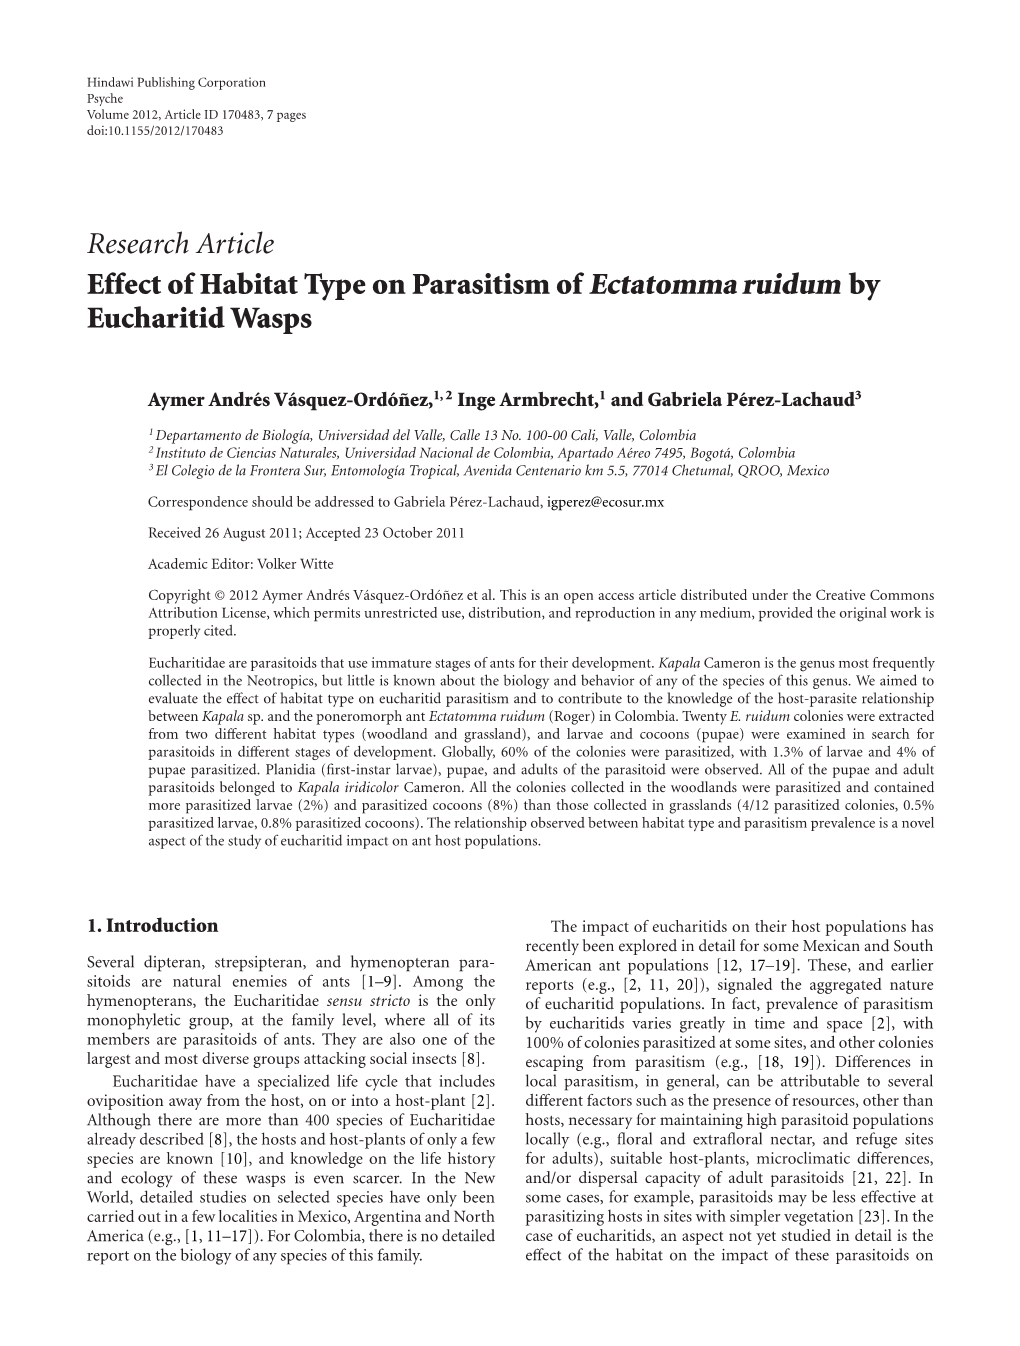 Research Article Effect of Habitat Type on Parasitism of Ectatomma Ruidum by Eucharitid Wasps